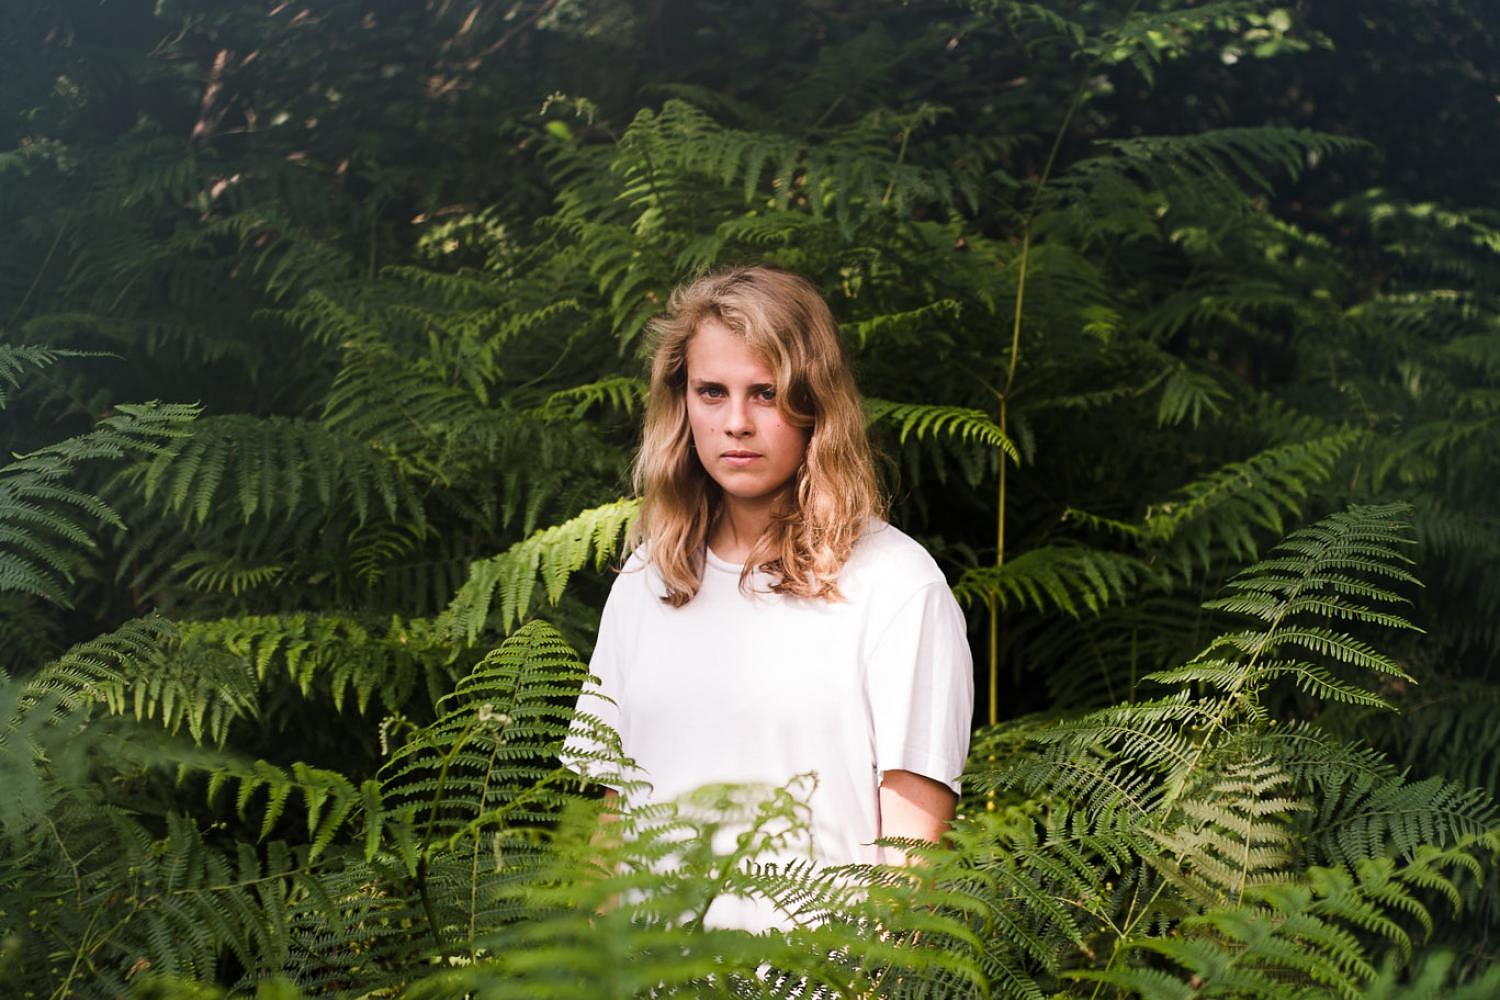 Marika Hackman: “It was a long time coming because of the amount of growing I had to do”